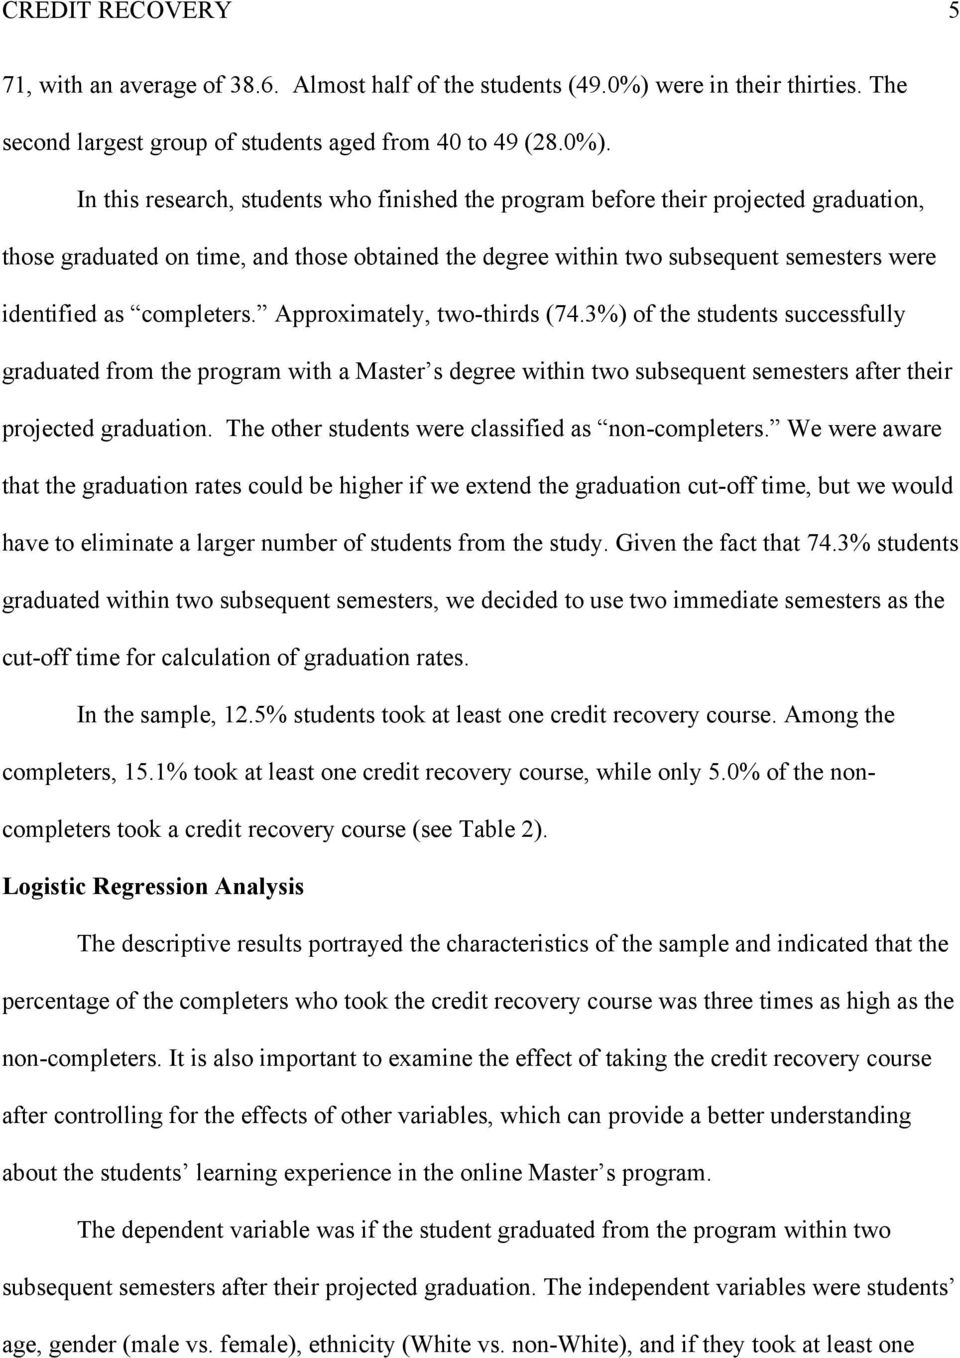 In this research, students who finished the program before their projected graduation, those graduated on time, and those obtained the degree within two subsequent semesters were identified as